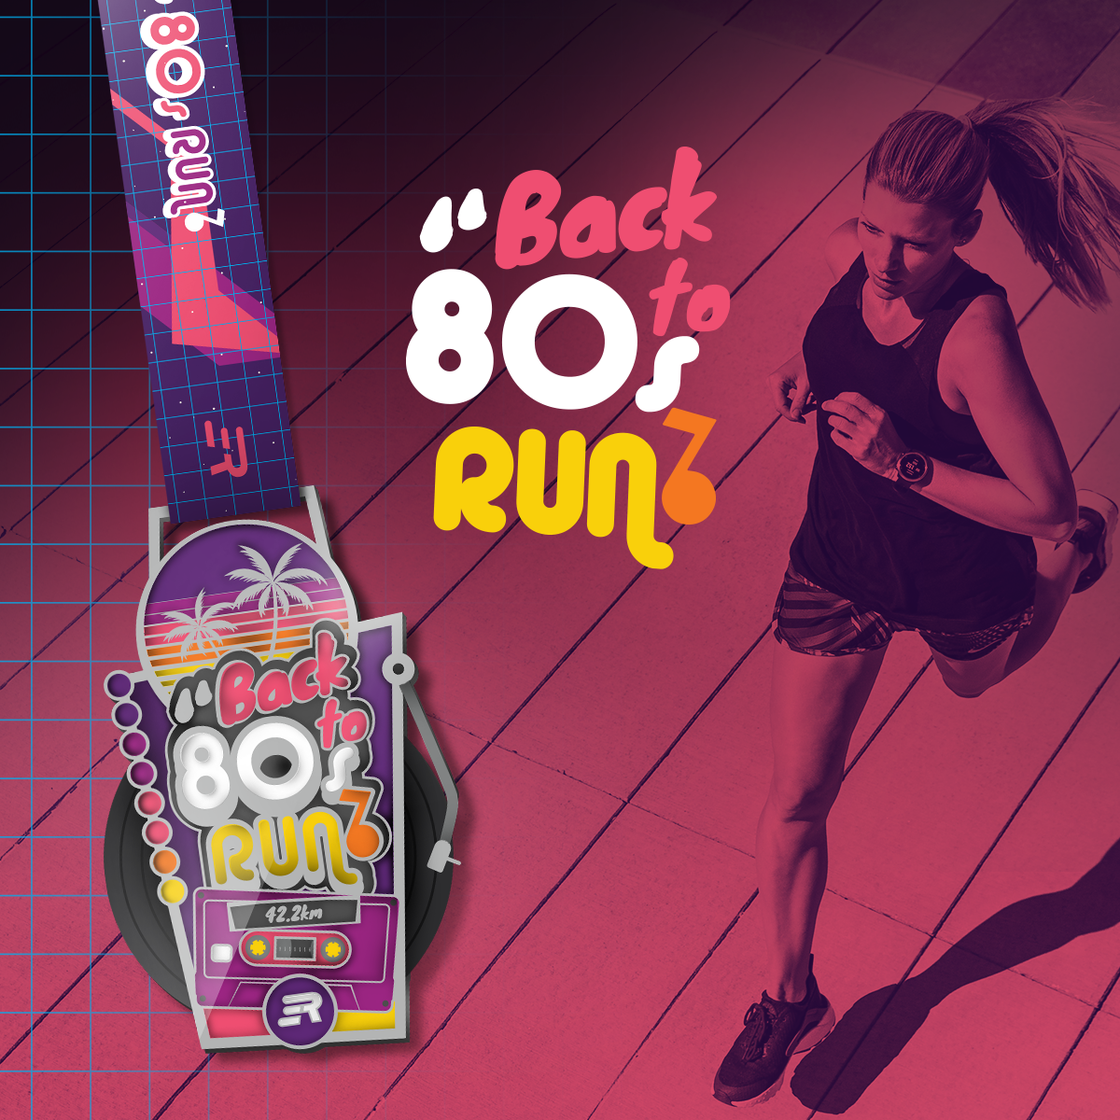 SPECIAL OFFER: Stunning Medal + Official T-Shirt | Back to 80's Run